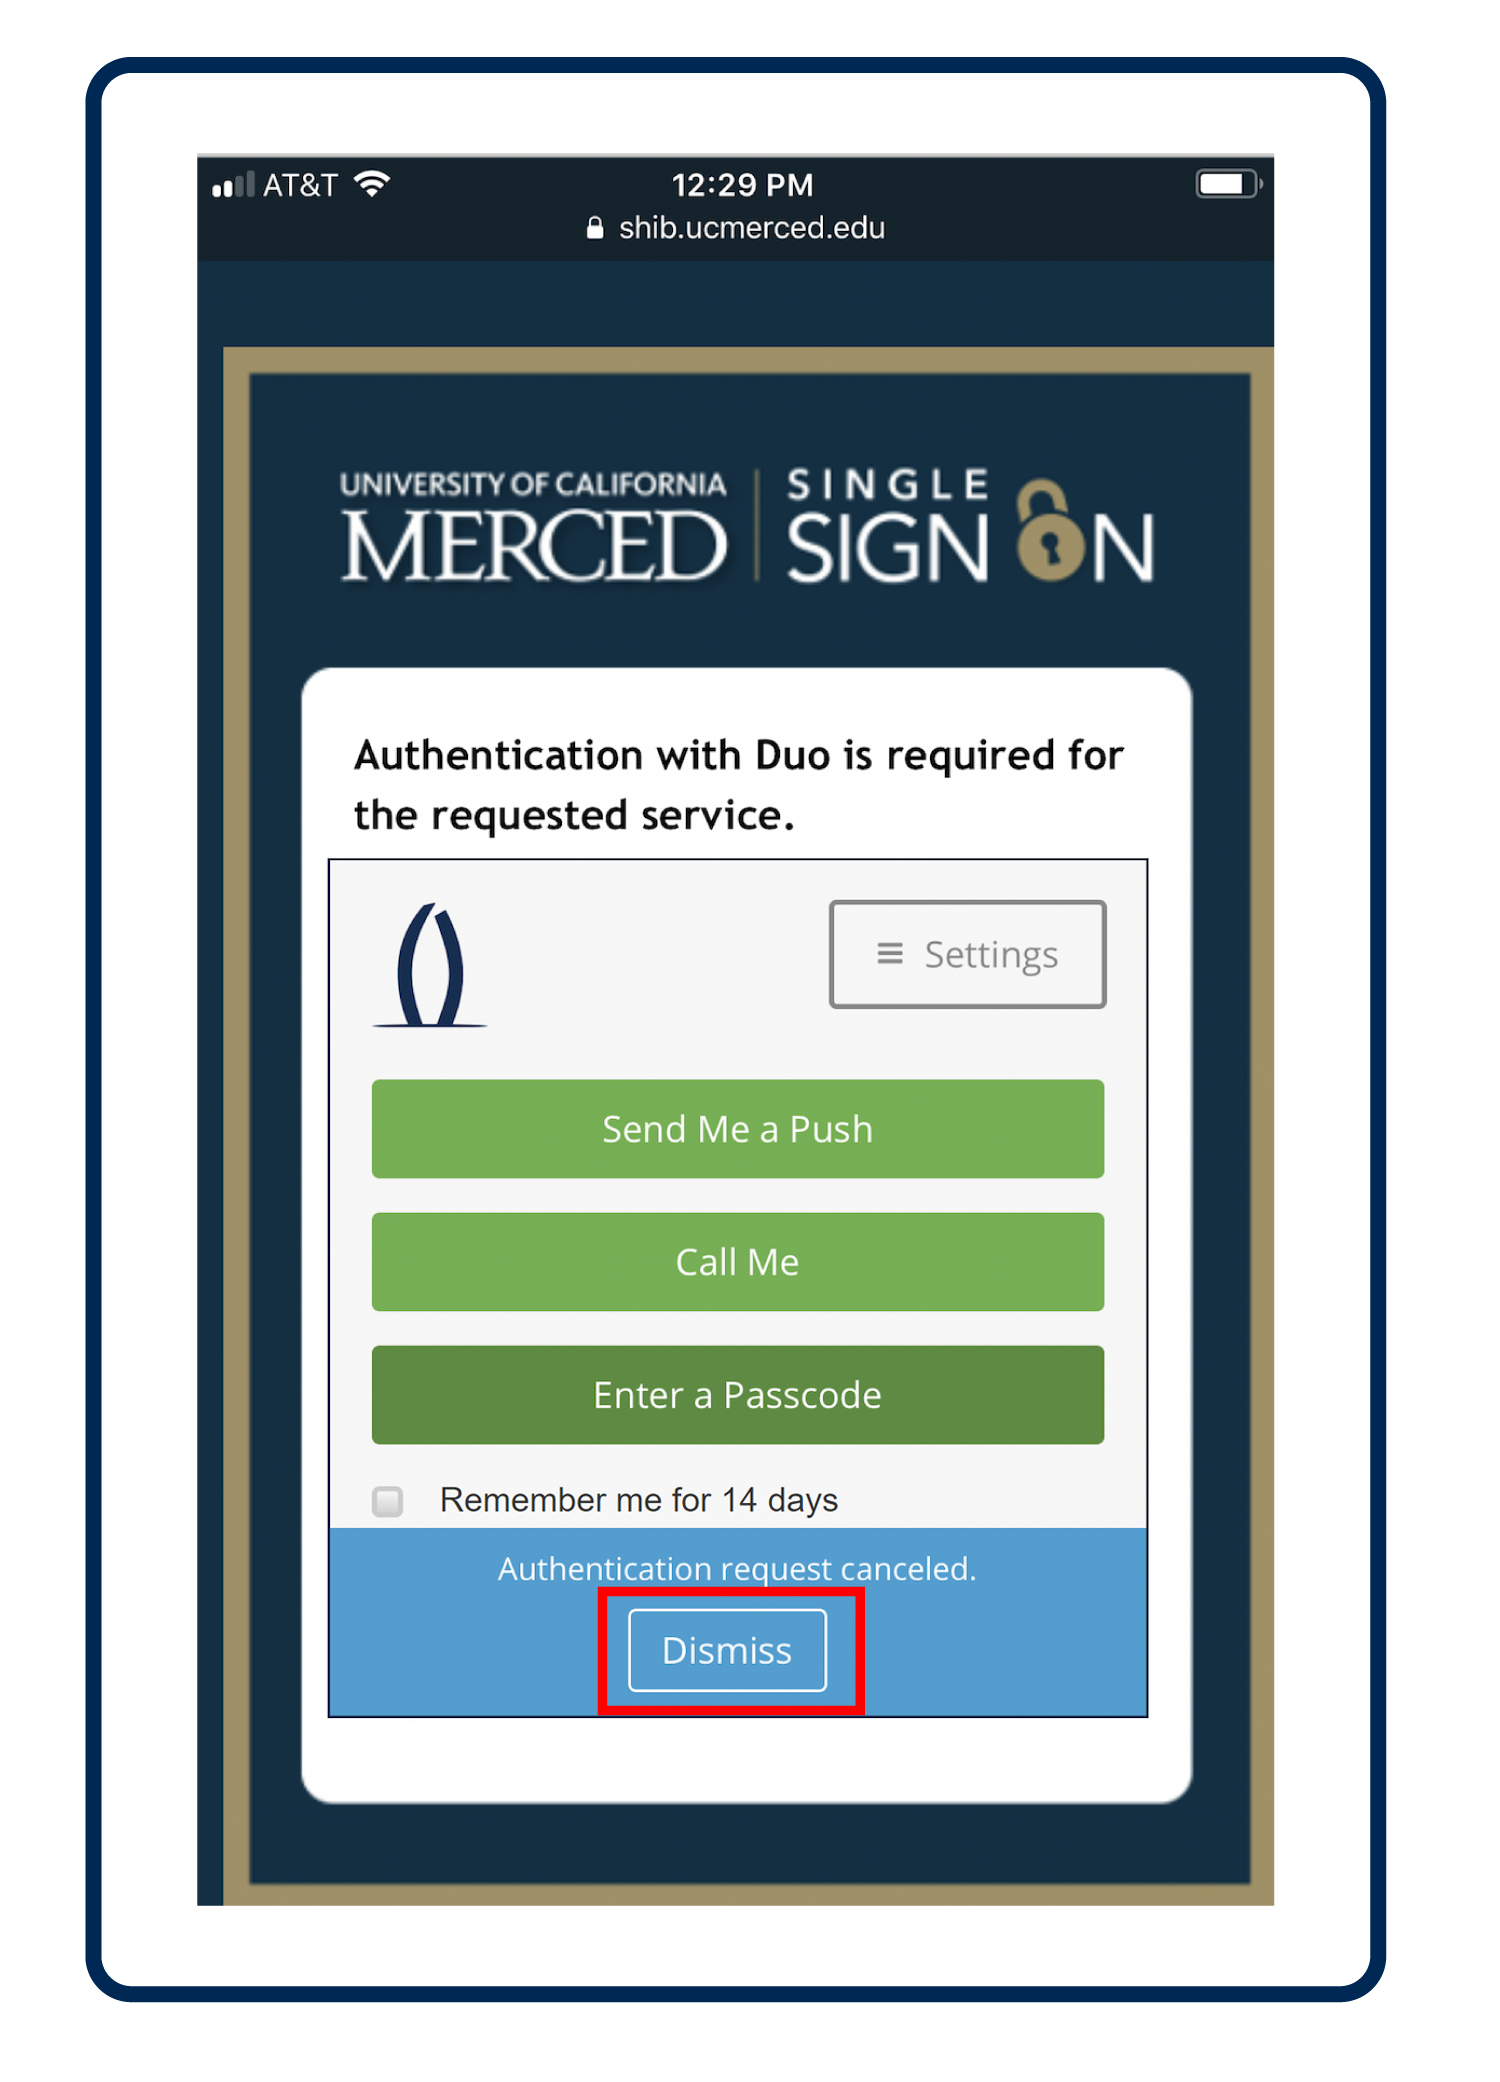 Screenshot of the UC Merced Single Sign on page with a box around the "Dismiss" button at the bottom of the page